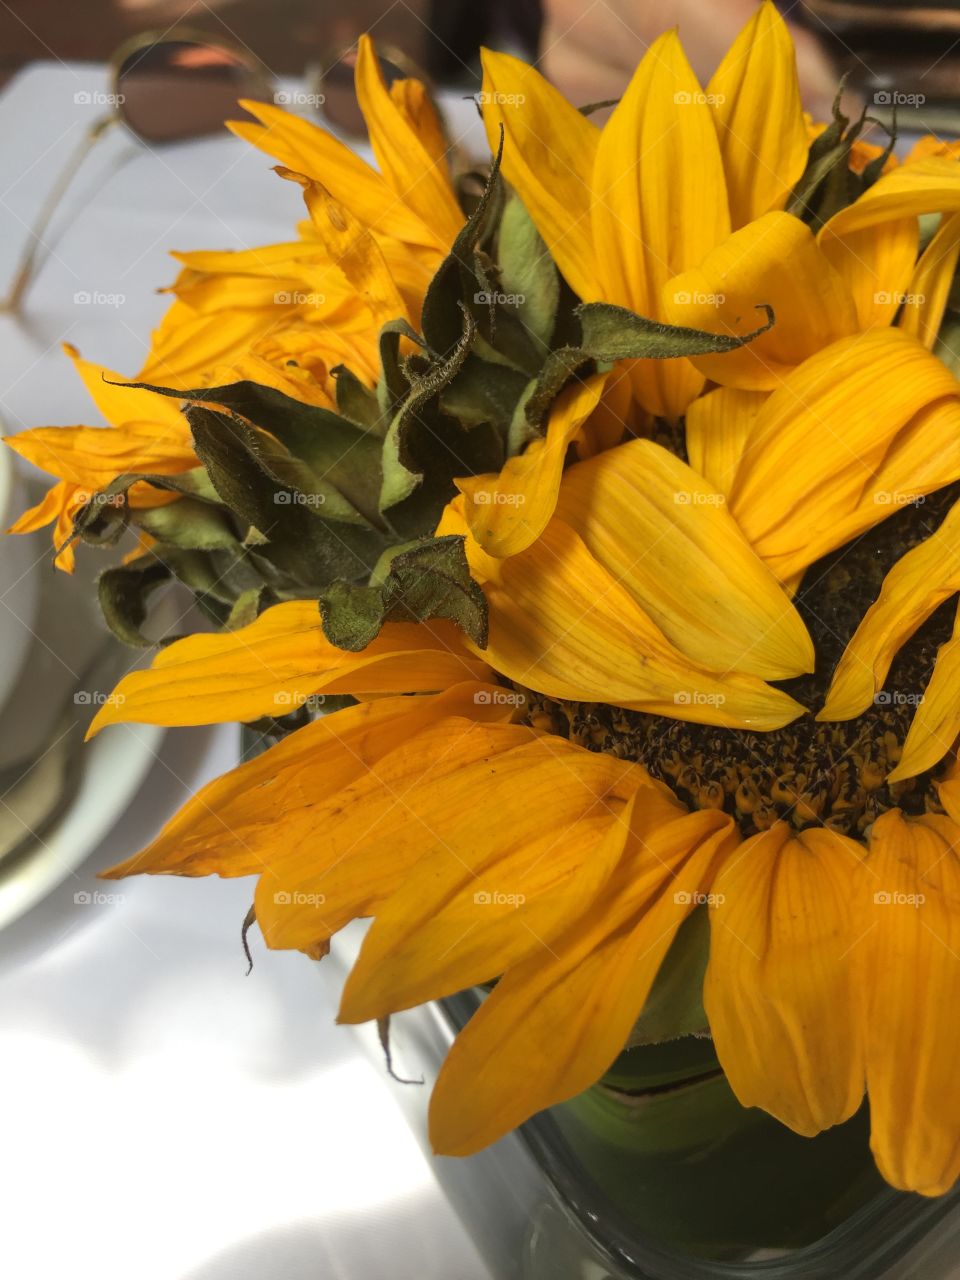 Sunflowers on a cafe tabletop 